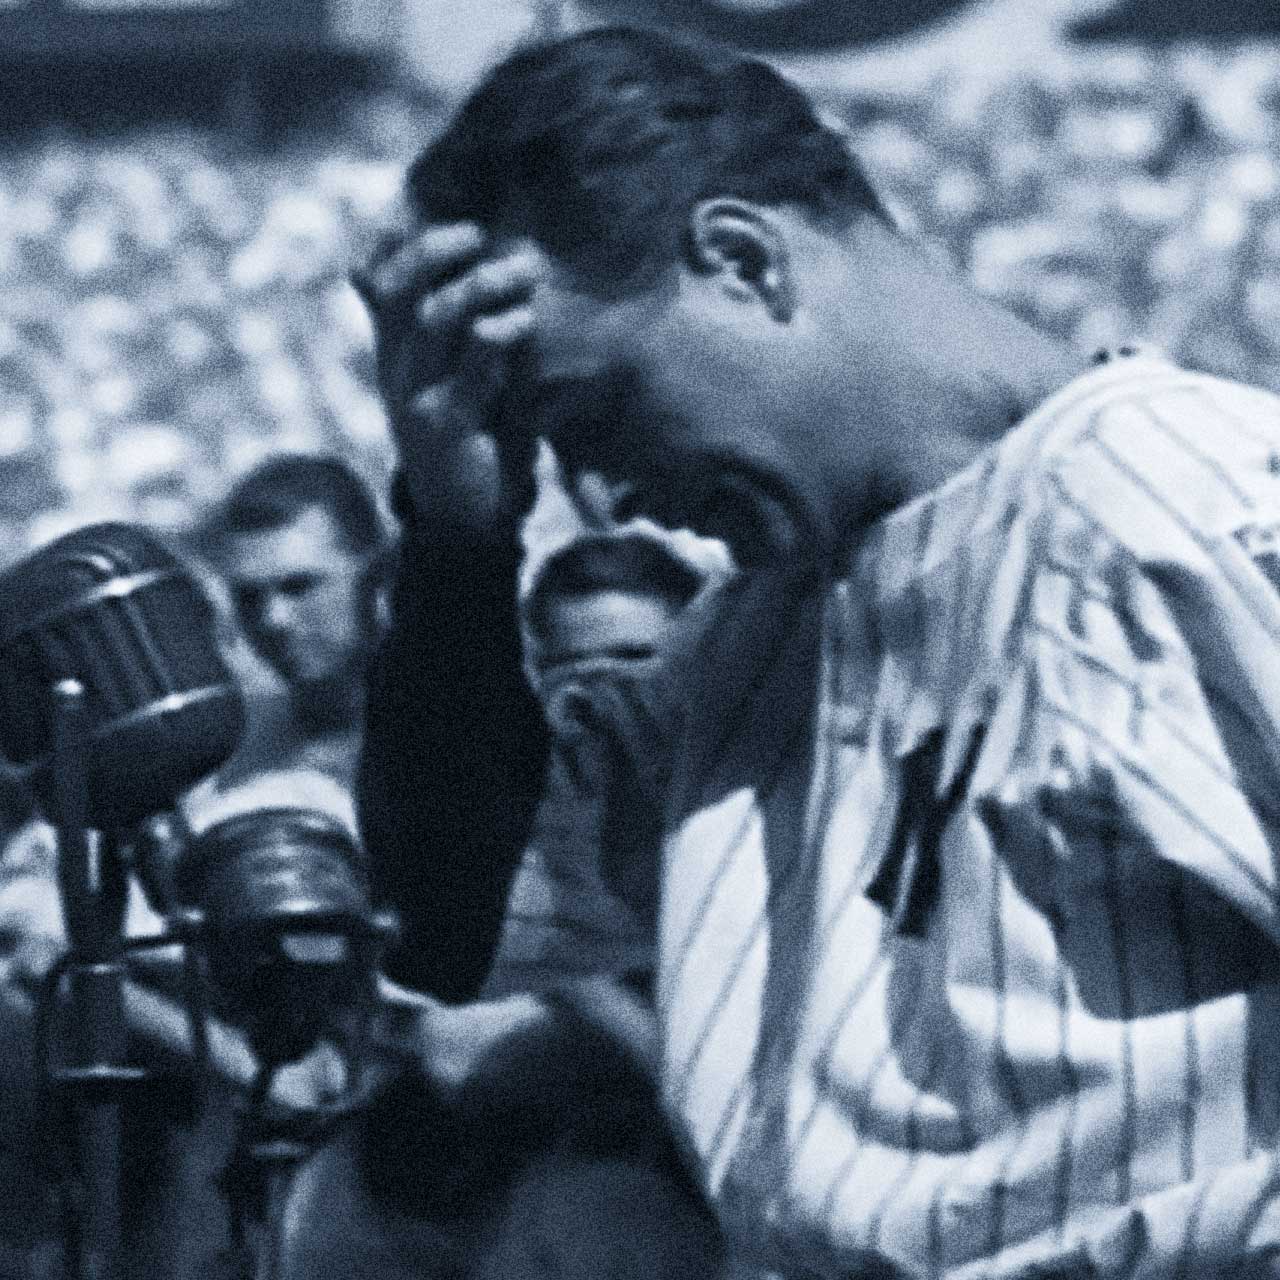 Yankees legend Lou Gehrig delivers his famous "Luckiest Man" speech.